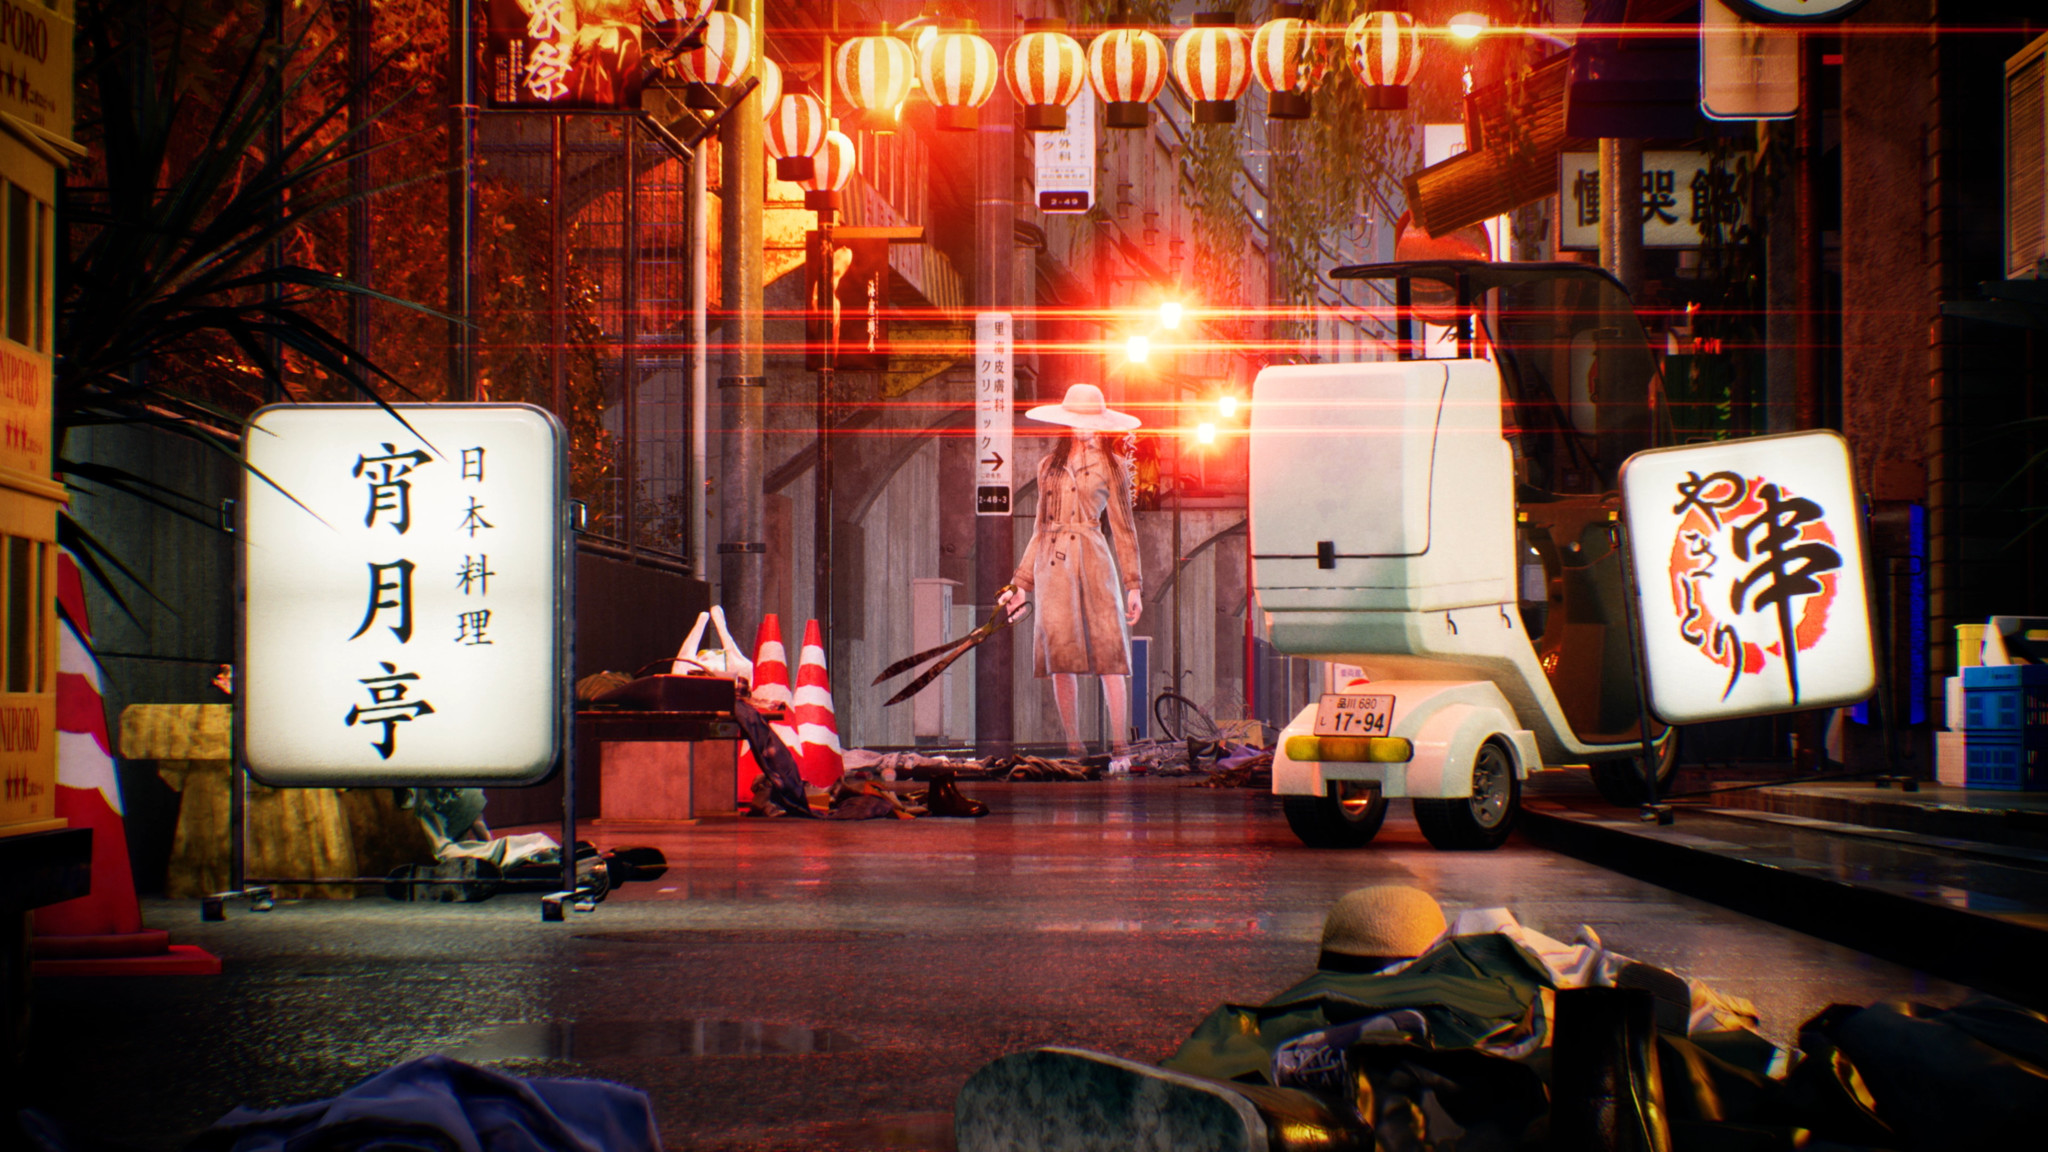 Preview — Ghostwire: Tokyo showcases a unique action horror game